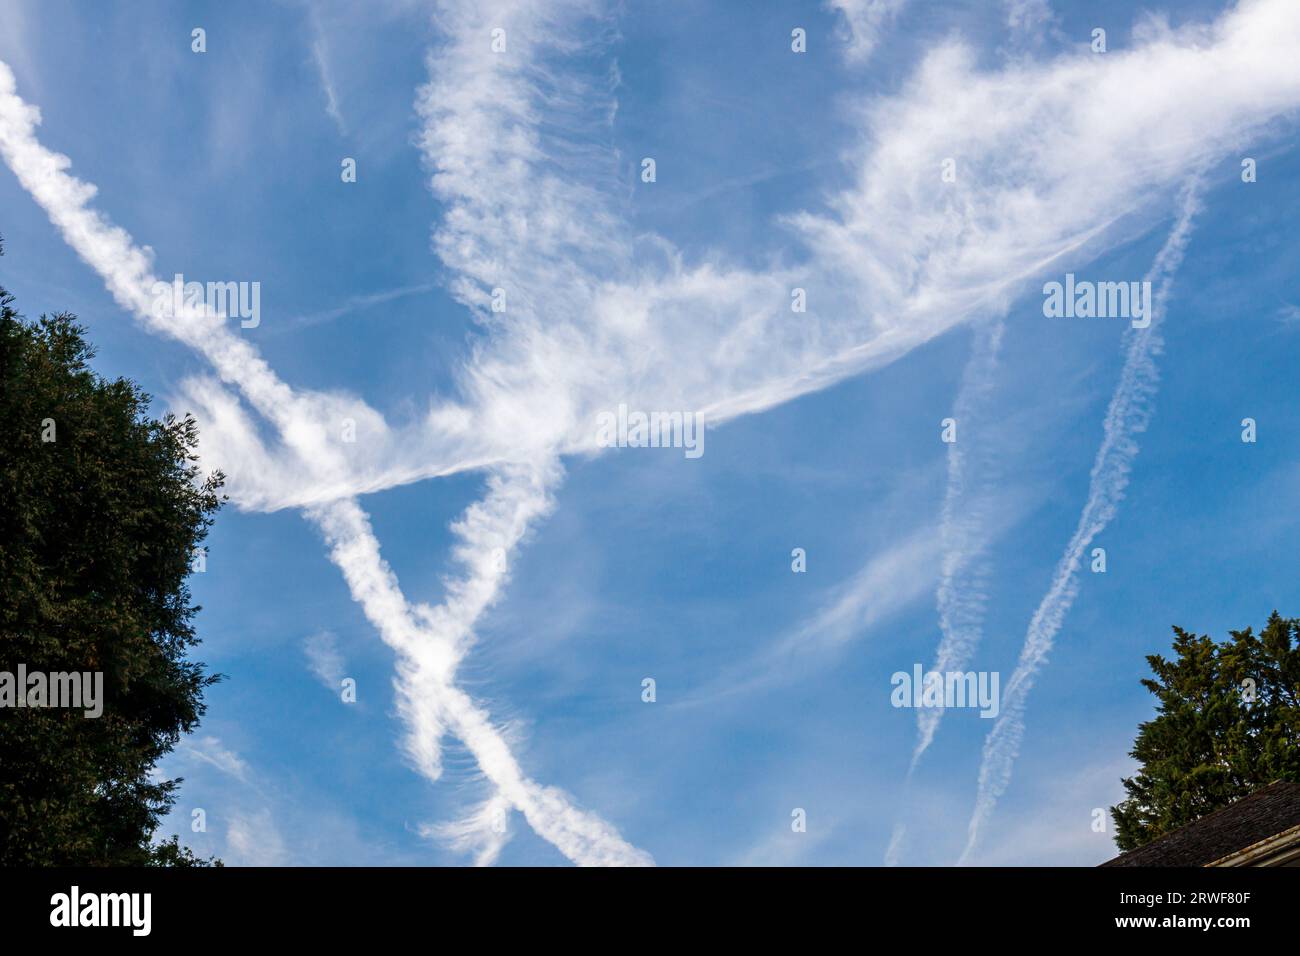 White criss-cross vapour trails from Heathrow bound aircraft forming triangular patterns against a blue sky in Surrey, south-east England Stock Photo